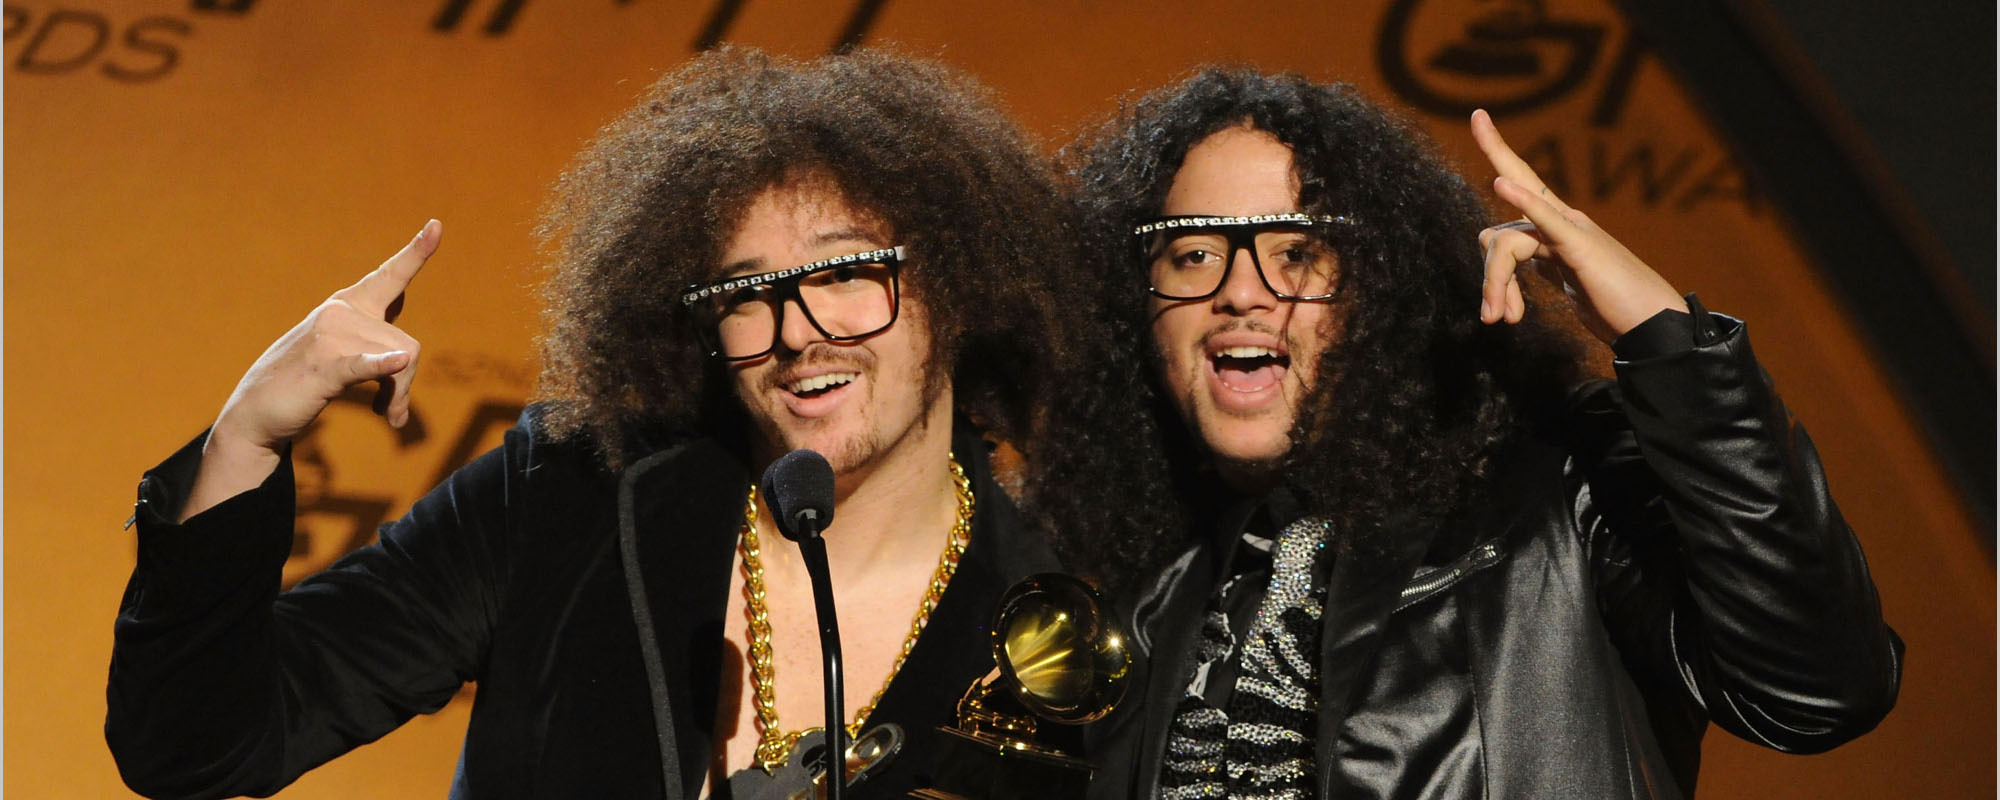 Meaning Behind the Party-Rocking Band Name: LMFAO